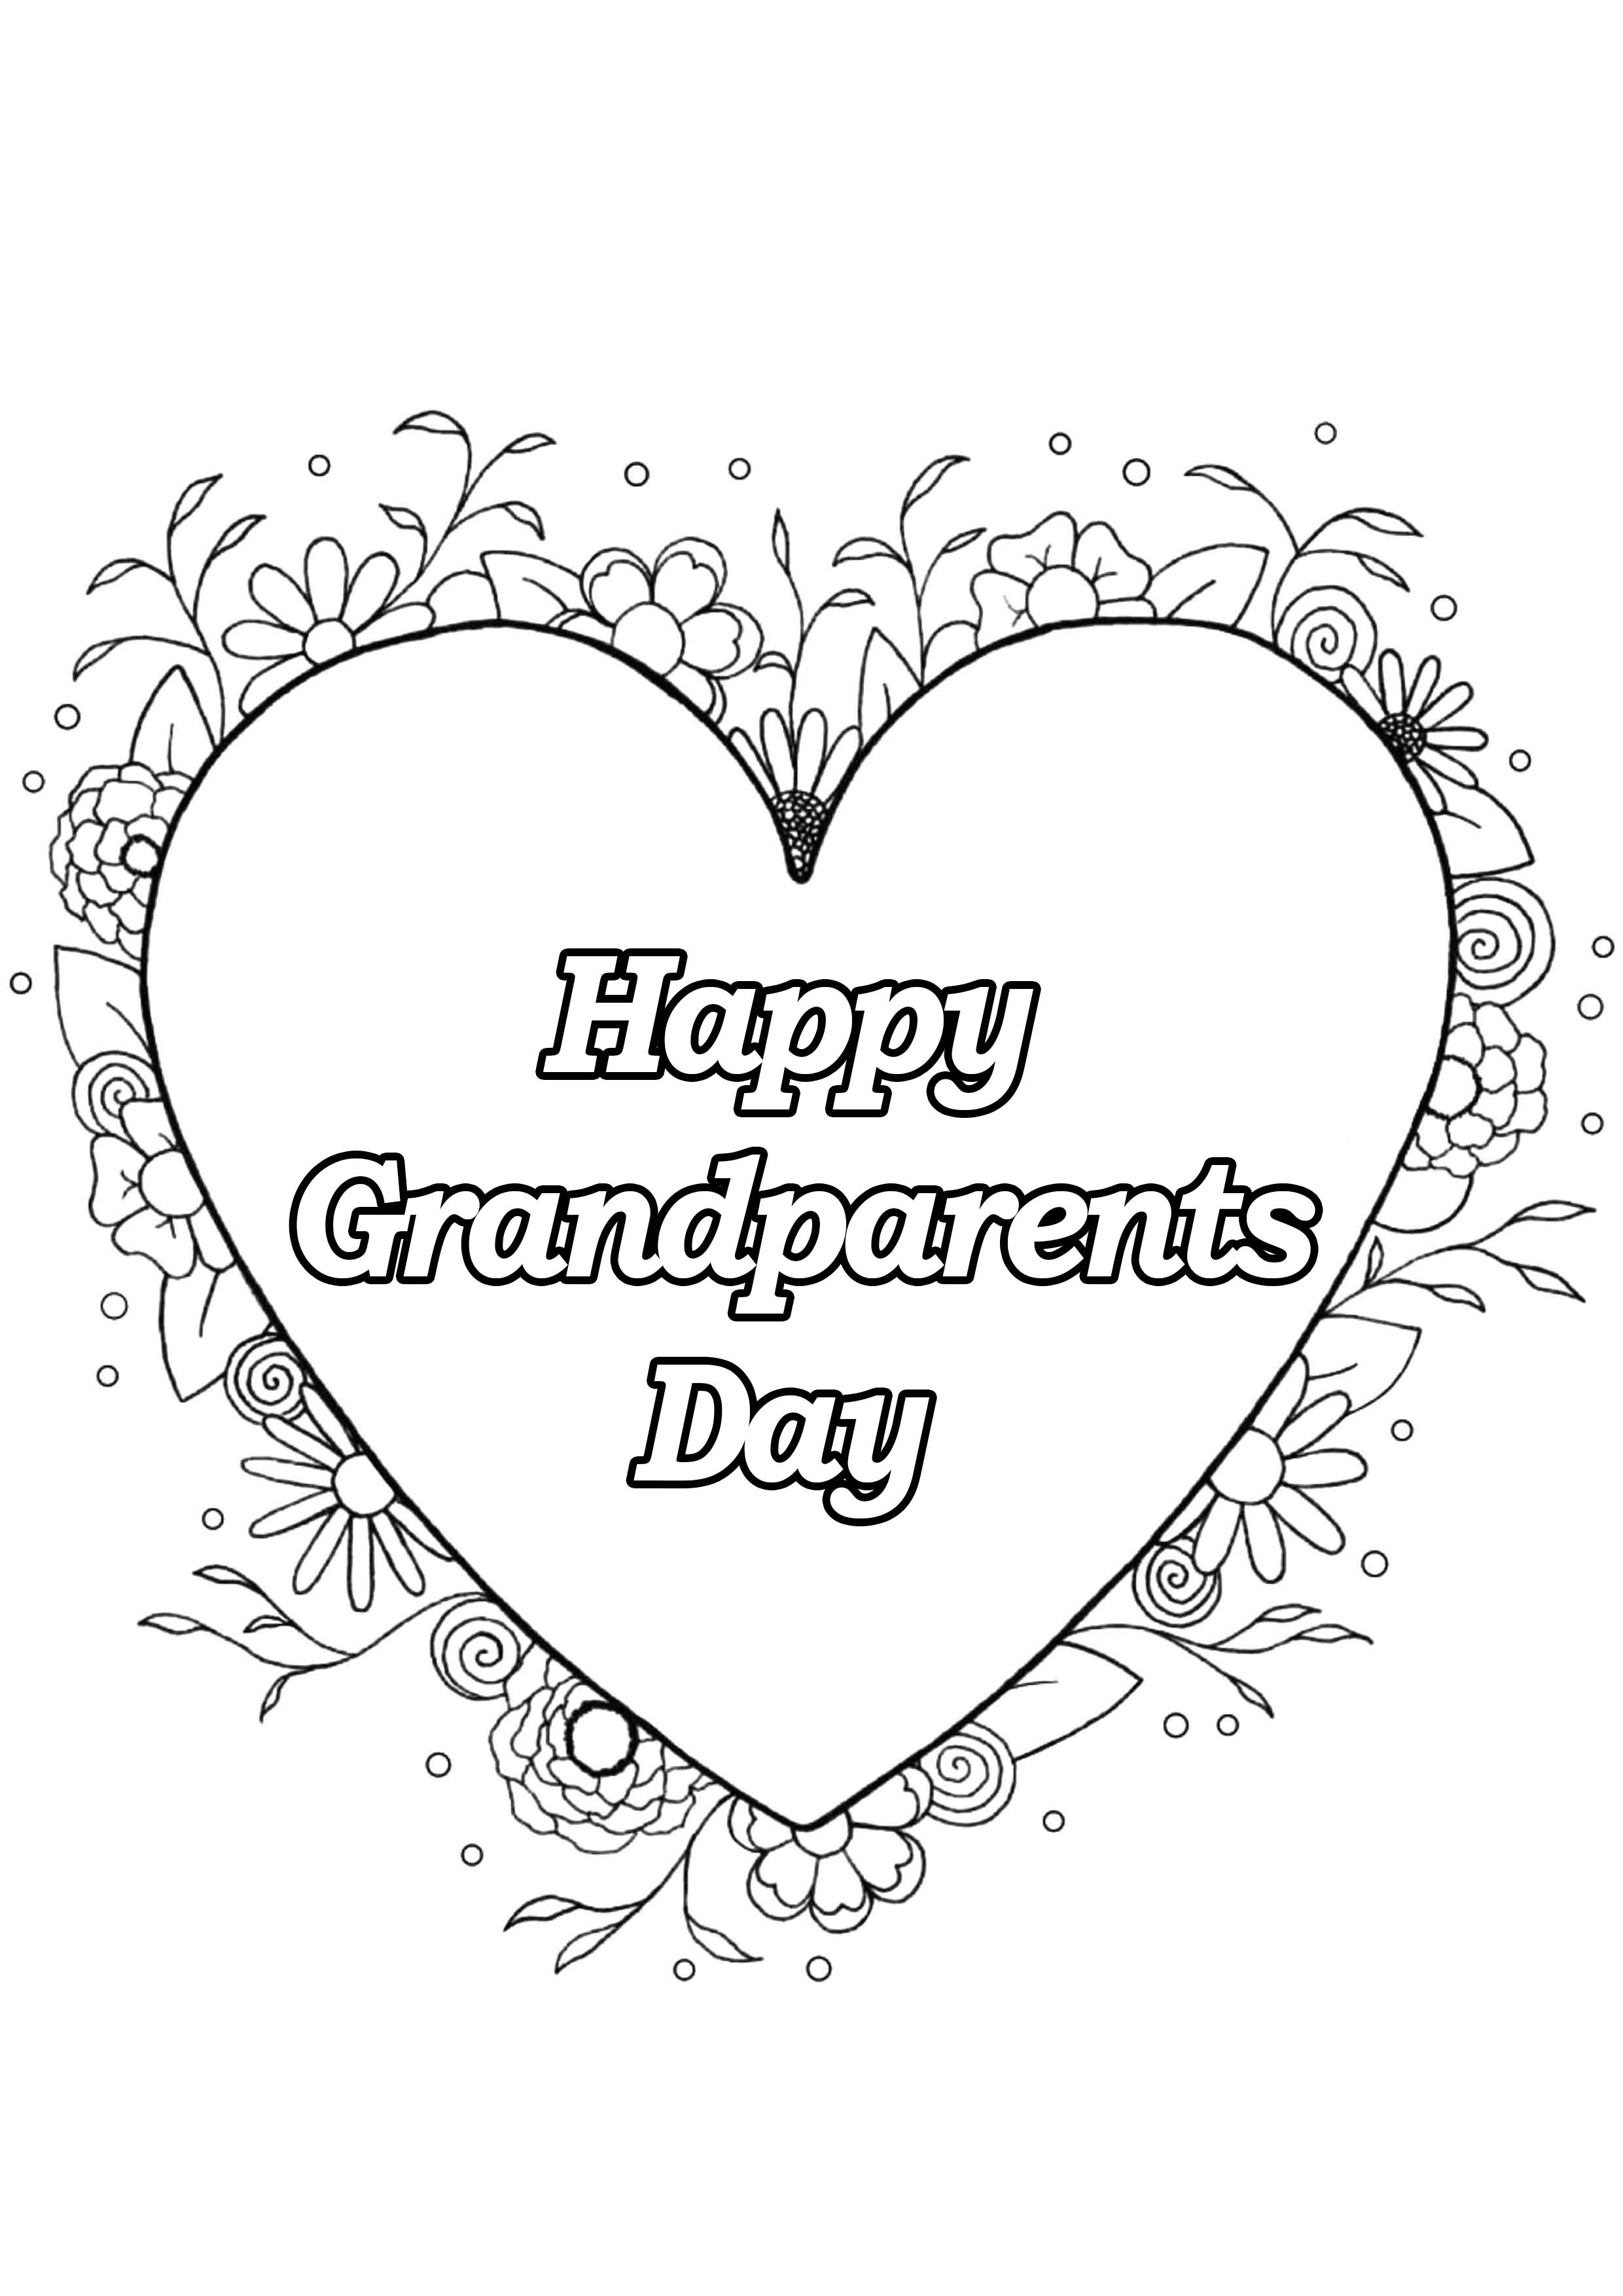 grandparents-day-coloring-pages